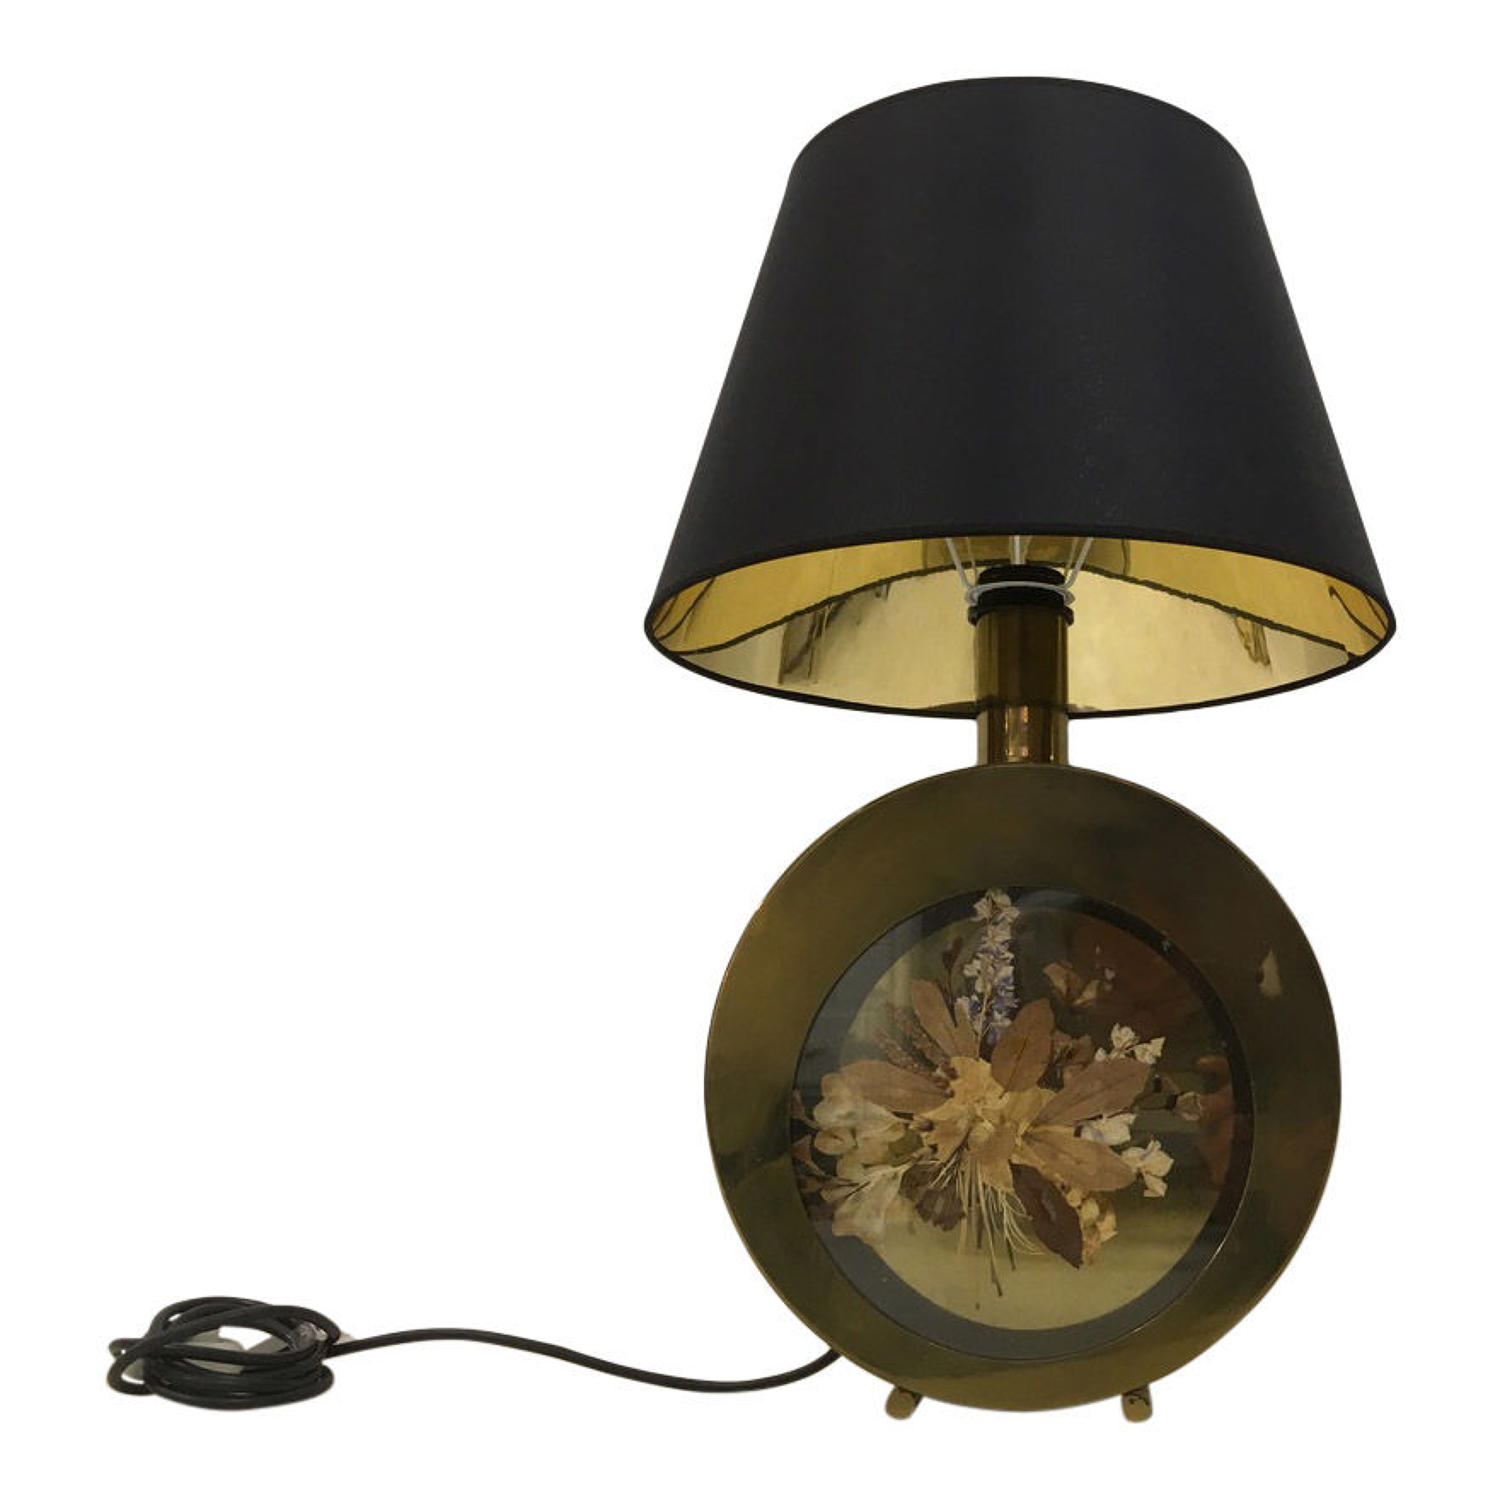 1970s Italian brass table lamp with flowers